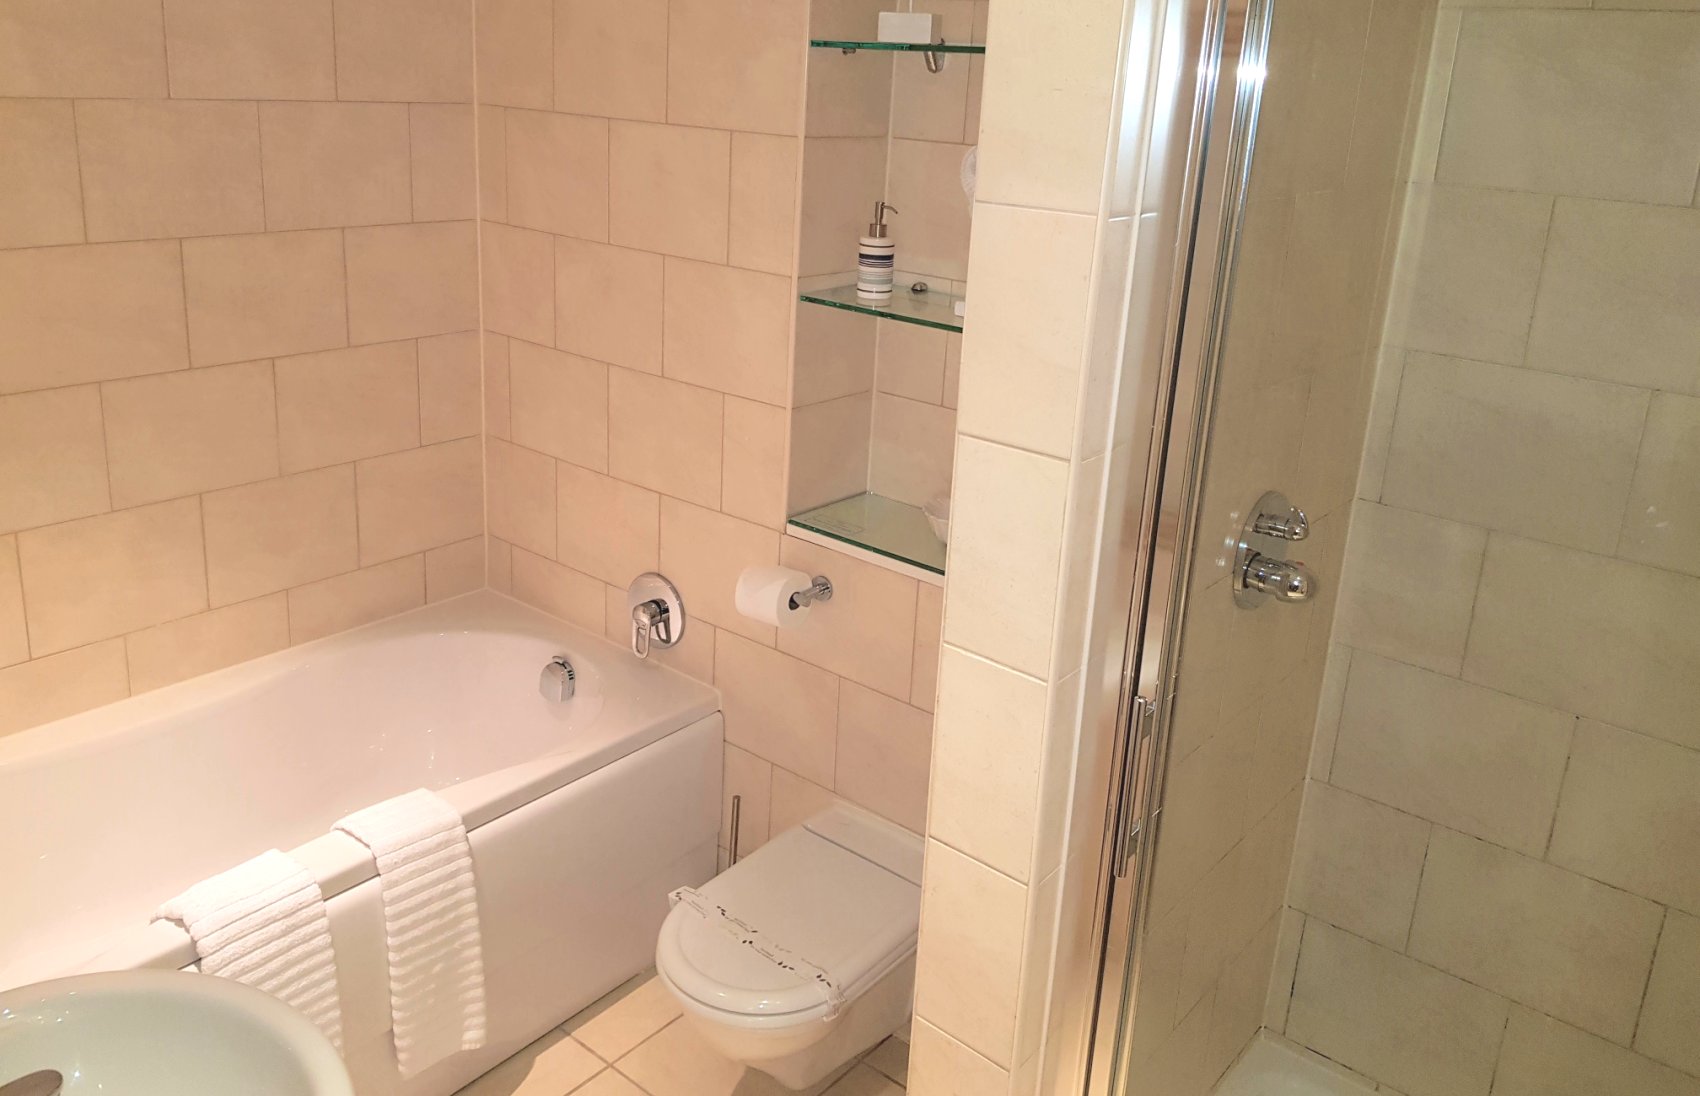 Luxury bathroom with separate bath and walk in shower